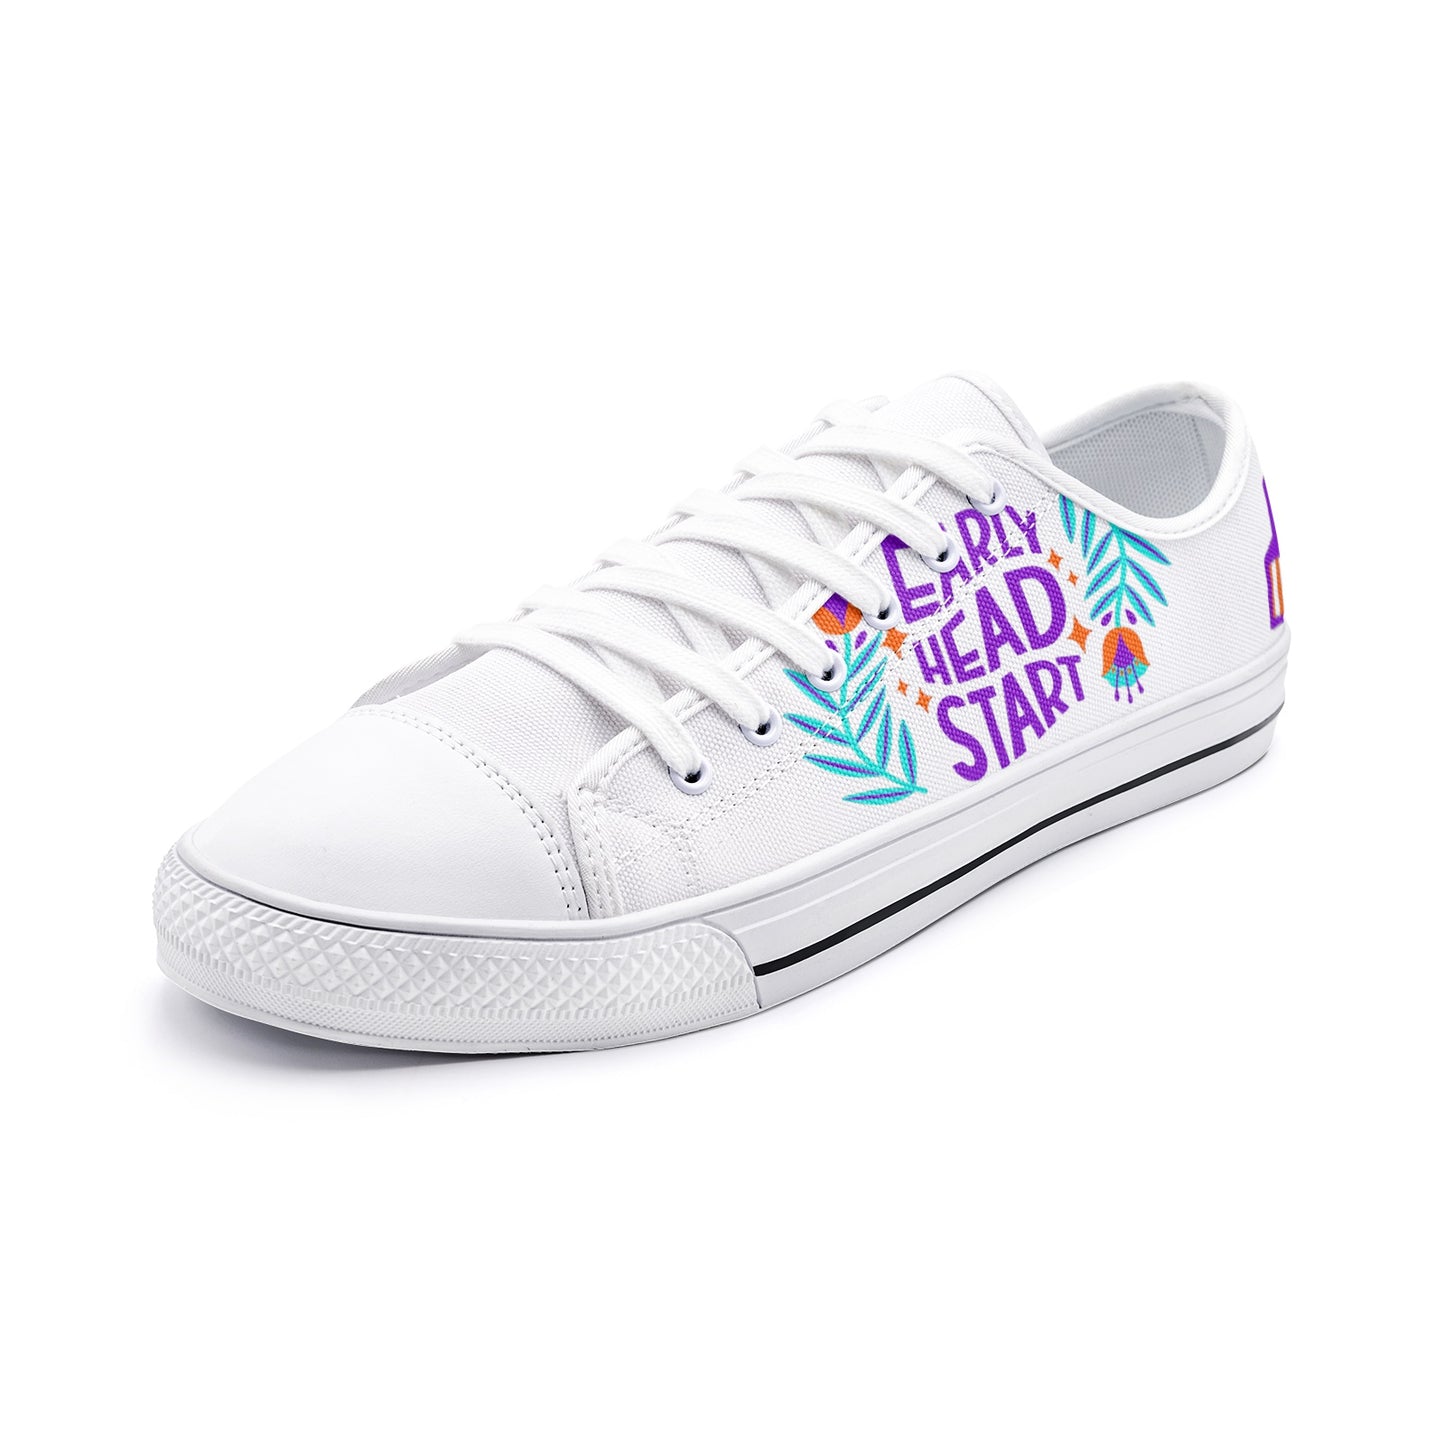 Spring Early Head Start Unisex Low Top Canvas Shoes (Purple)